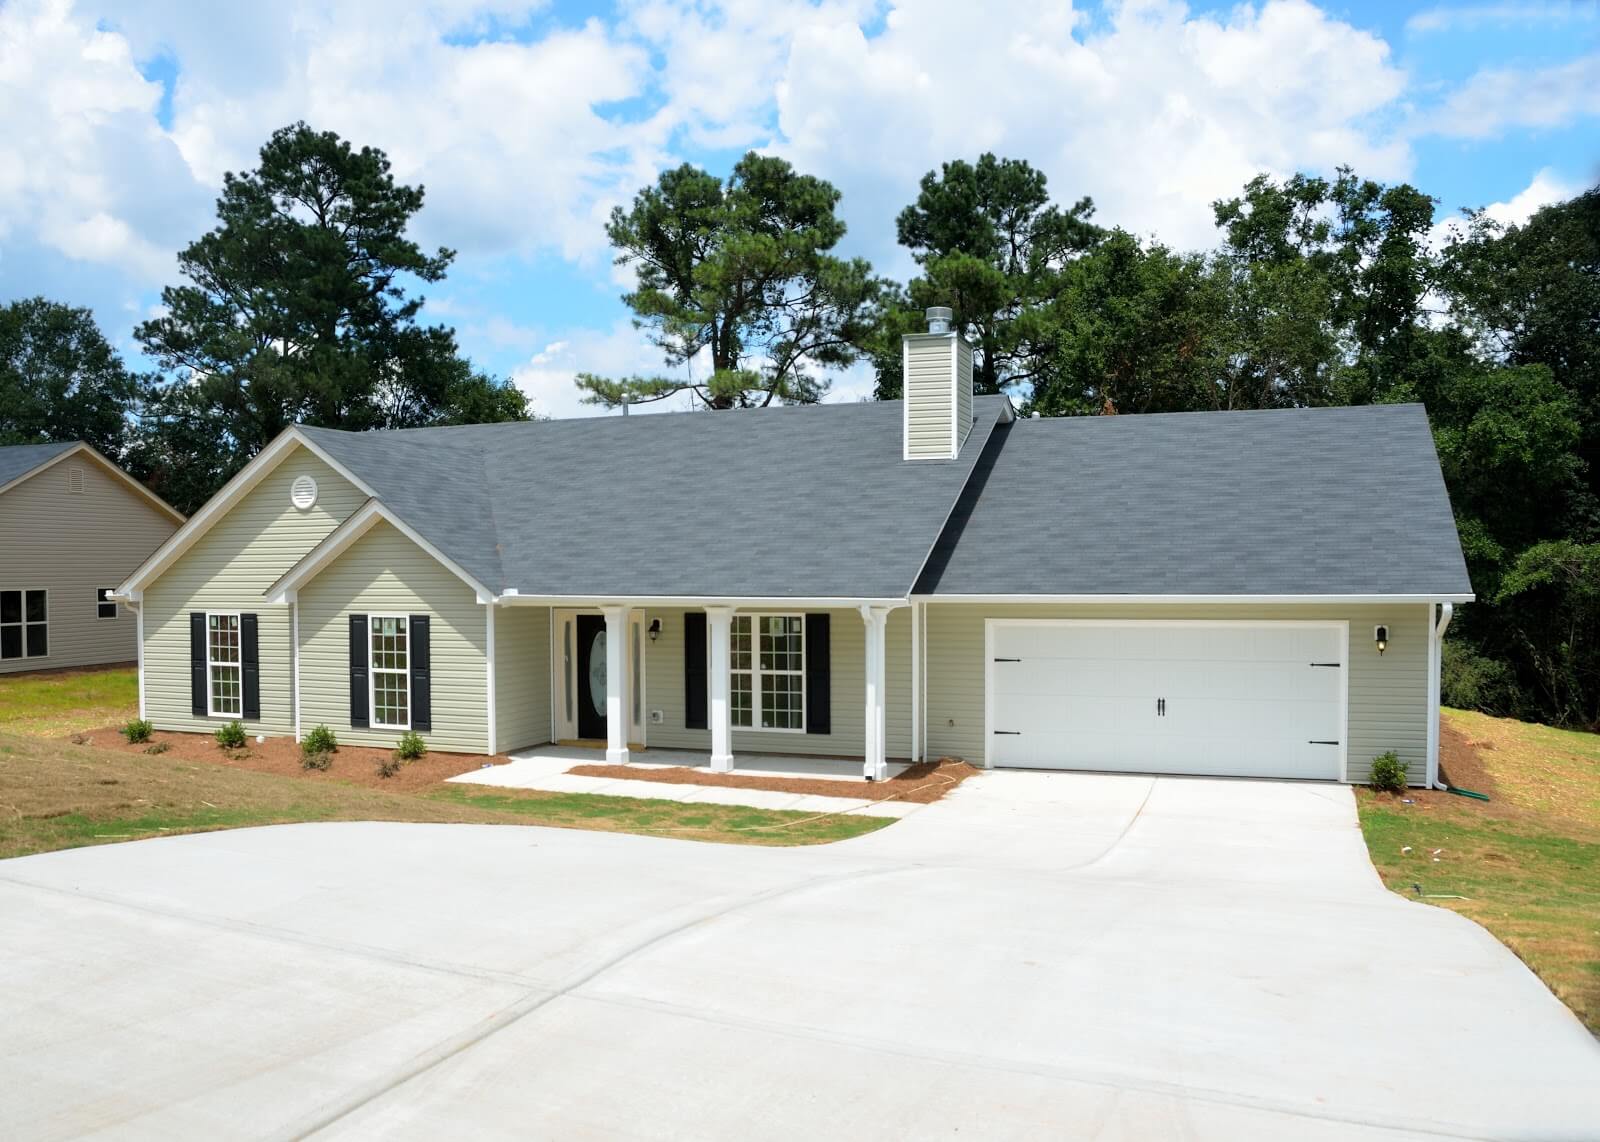 Best Roofing Companies In Orlando Orlando Best Roofing Companies